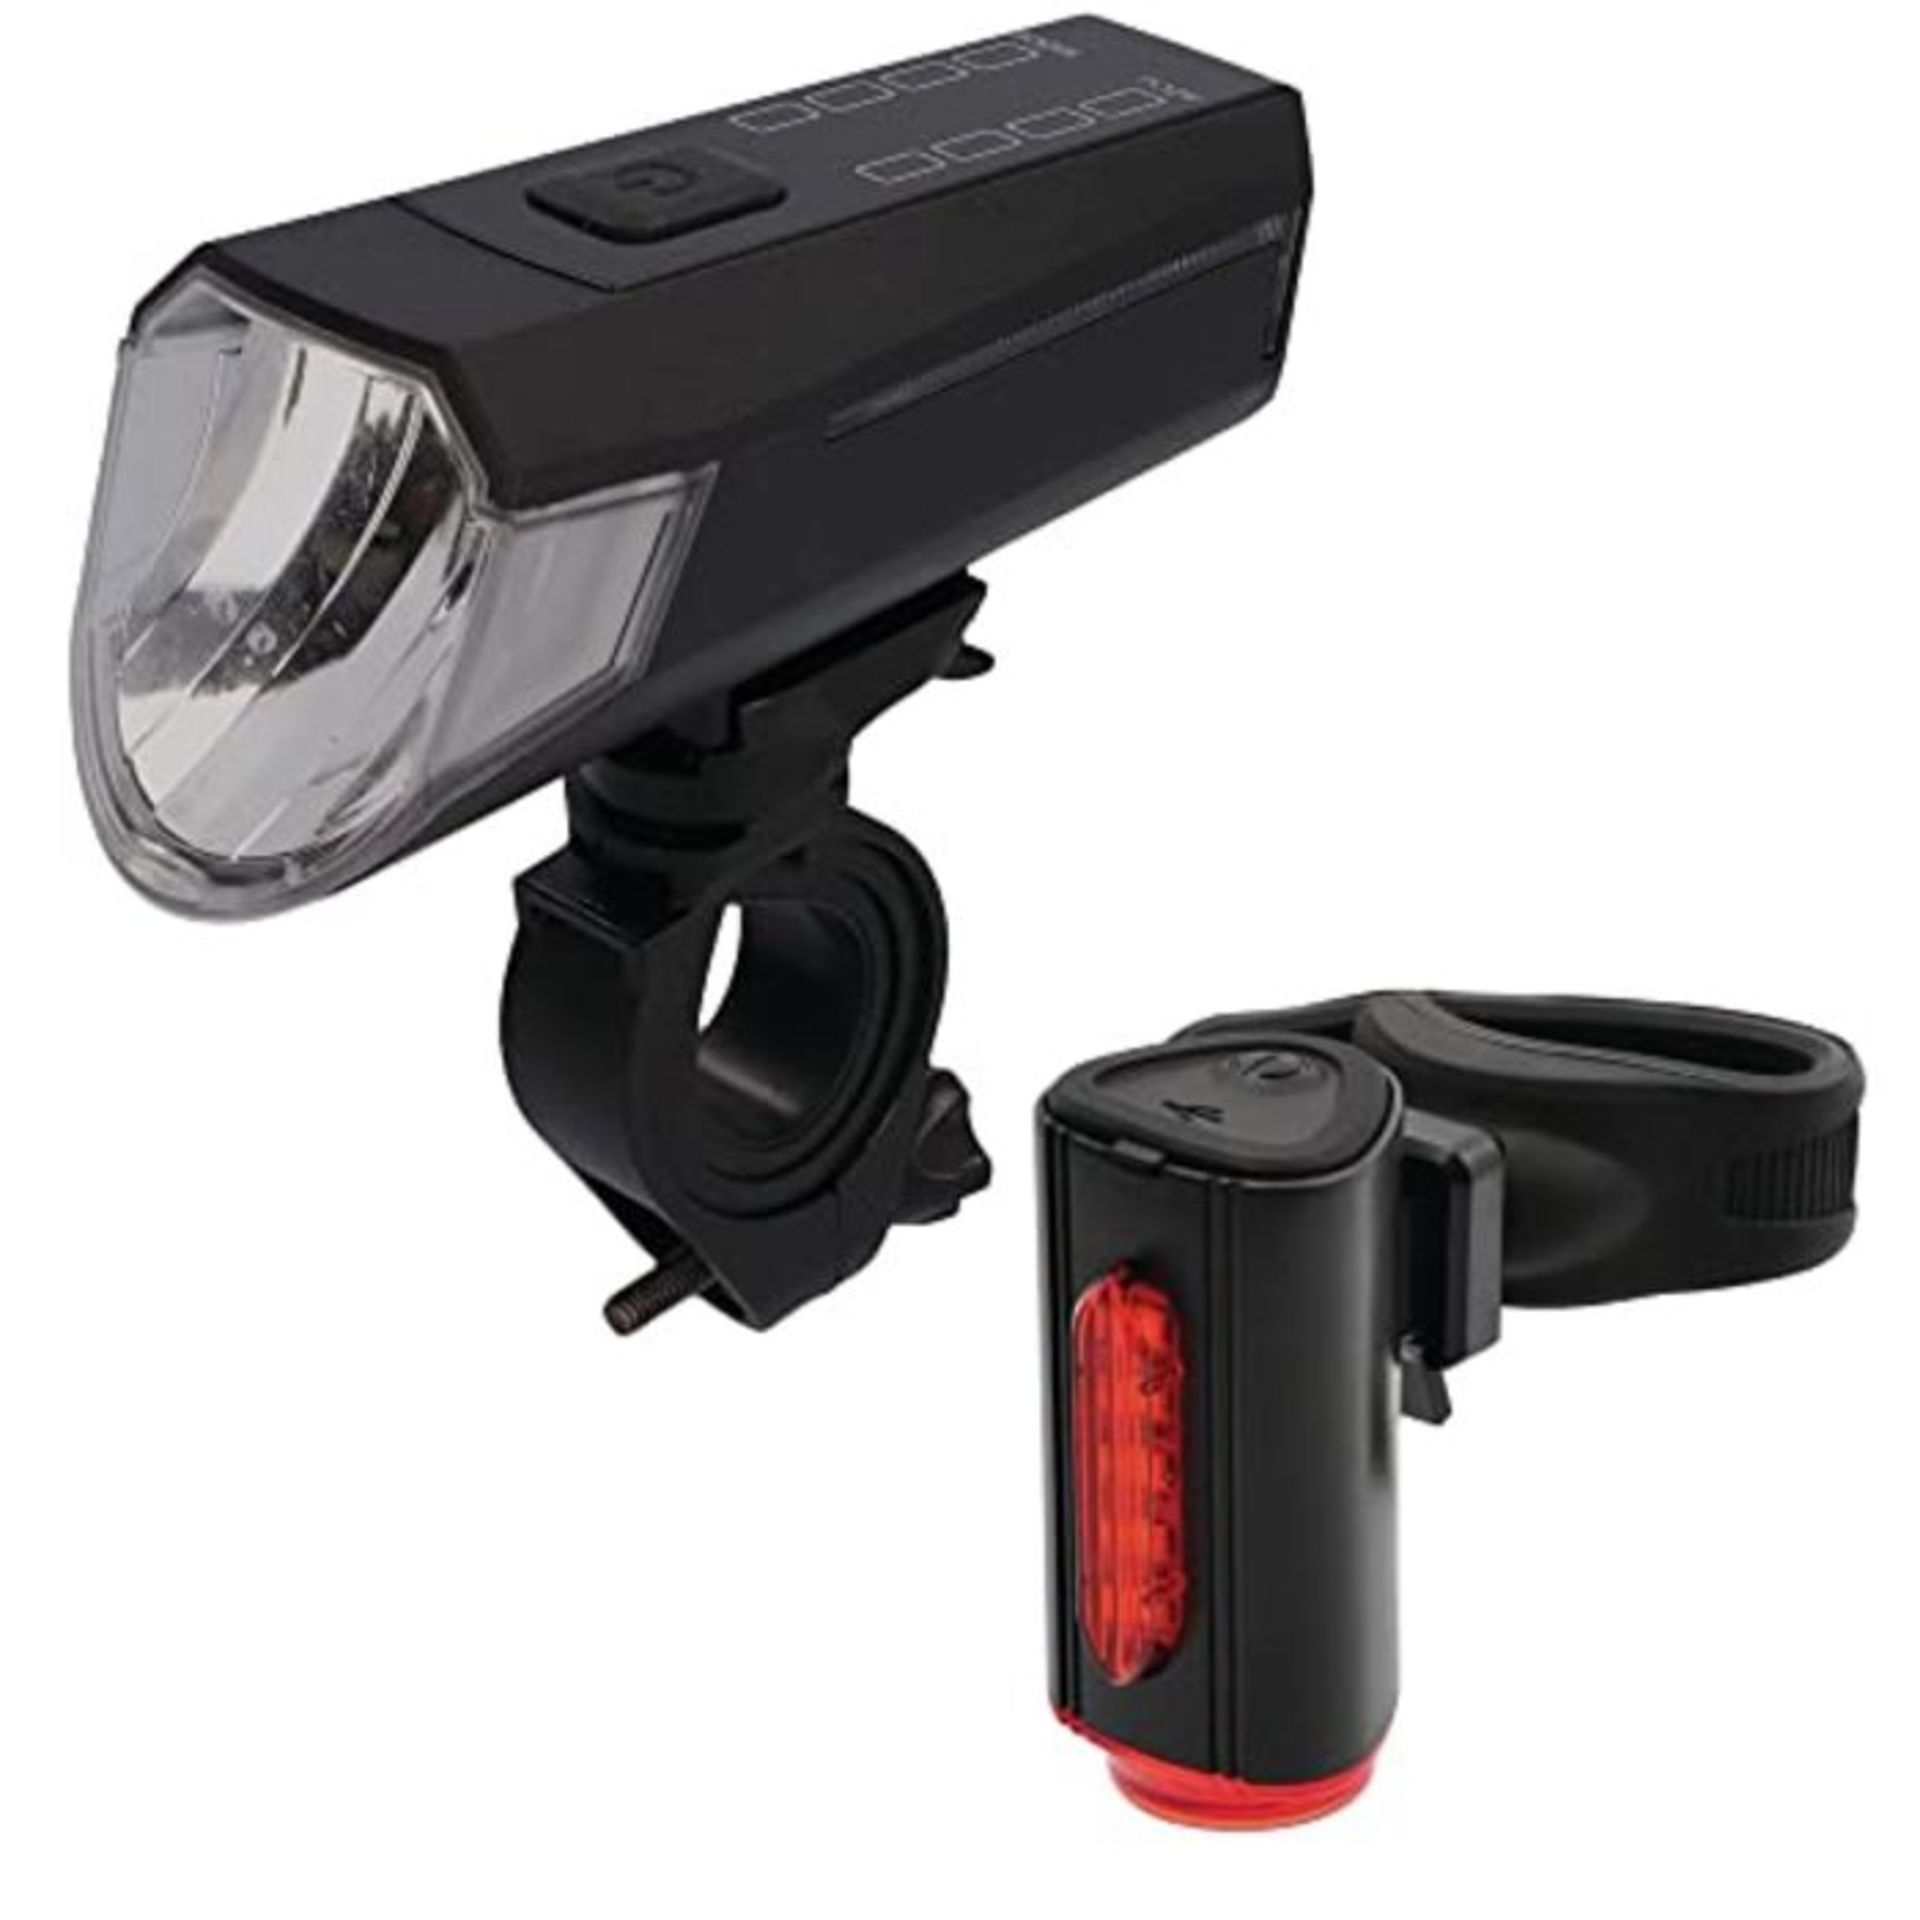 Fischer LED lighting set, with 360? floor light for more visibility and protection, r